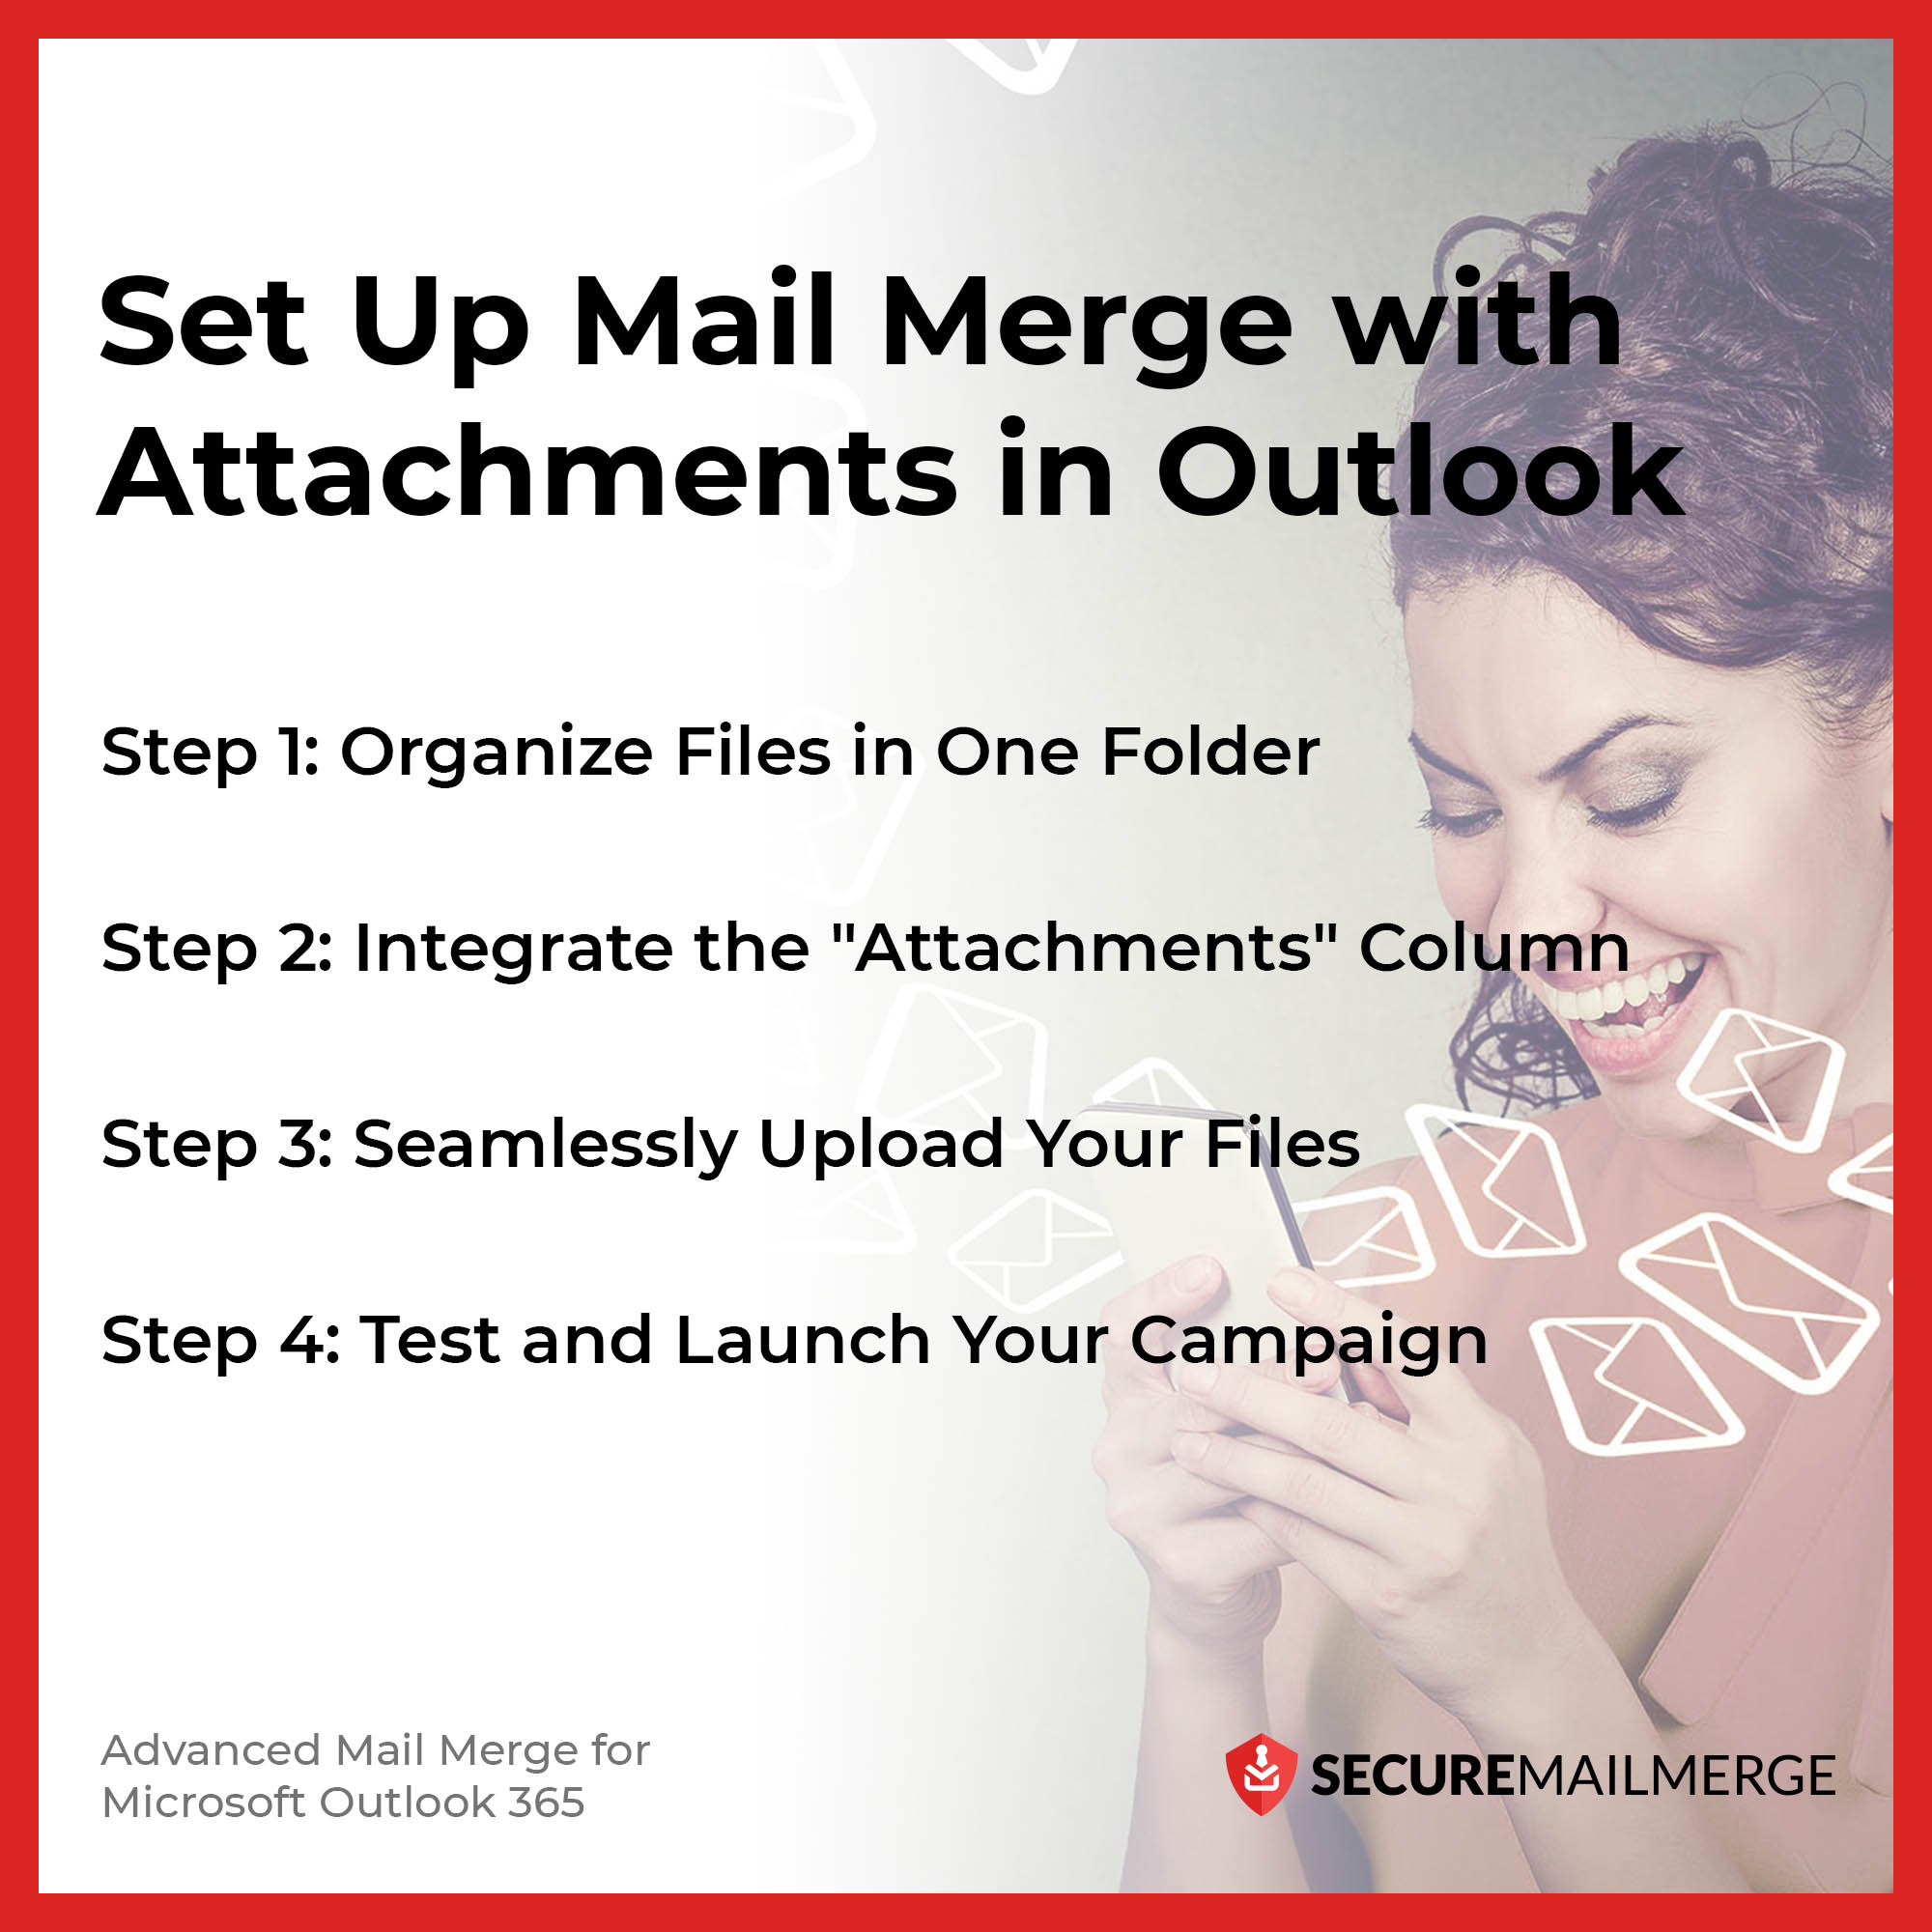 Set Up Mail Merge with Attachments in Outlook